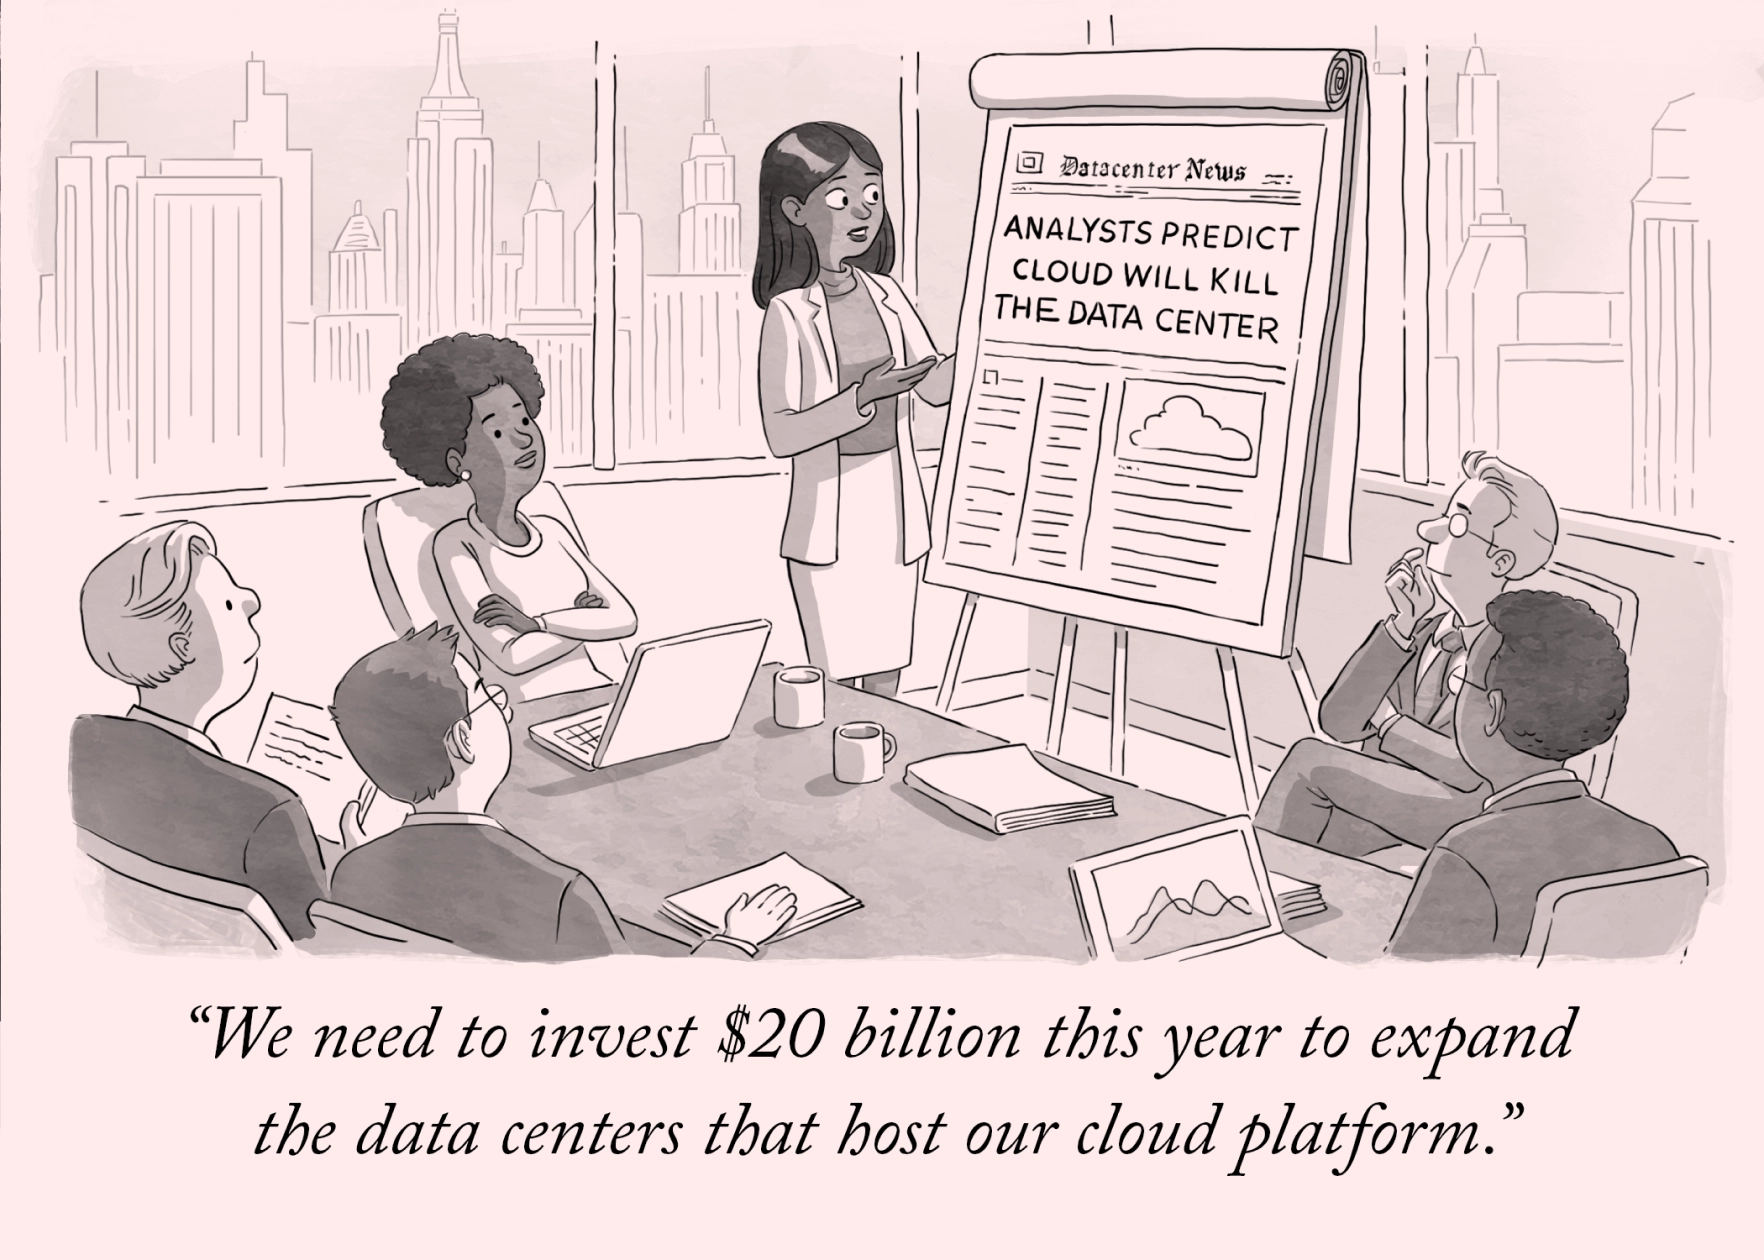 A cartoon-style illustration of a woman giving a presentation of the company projection plan in front of five people. She is showing an enlarged version of the "Datacenter News" front page. The headline says, "We need to invest $20 billion this year to expand the data centers that host our cloud platform."